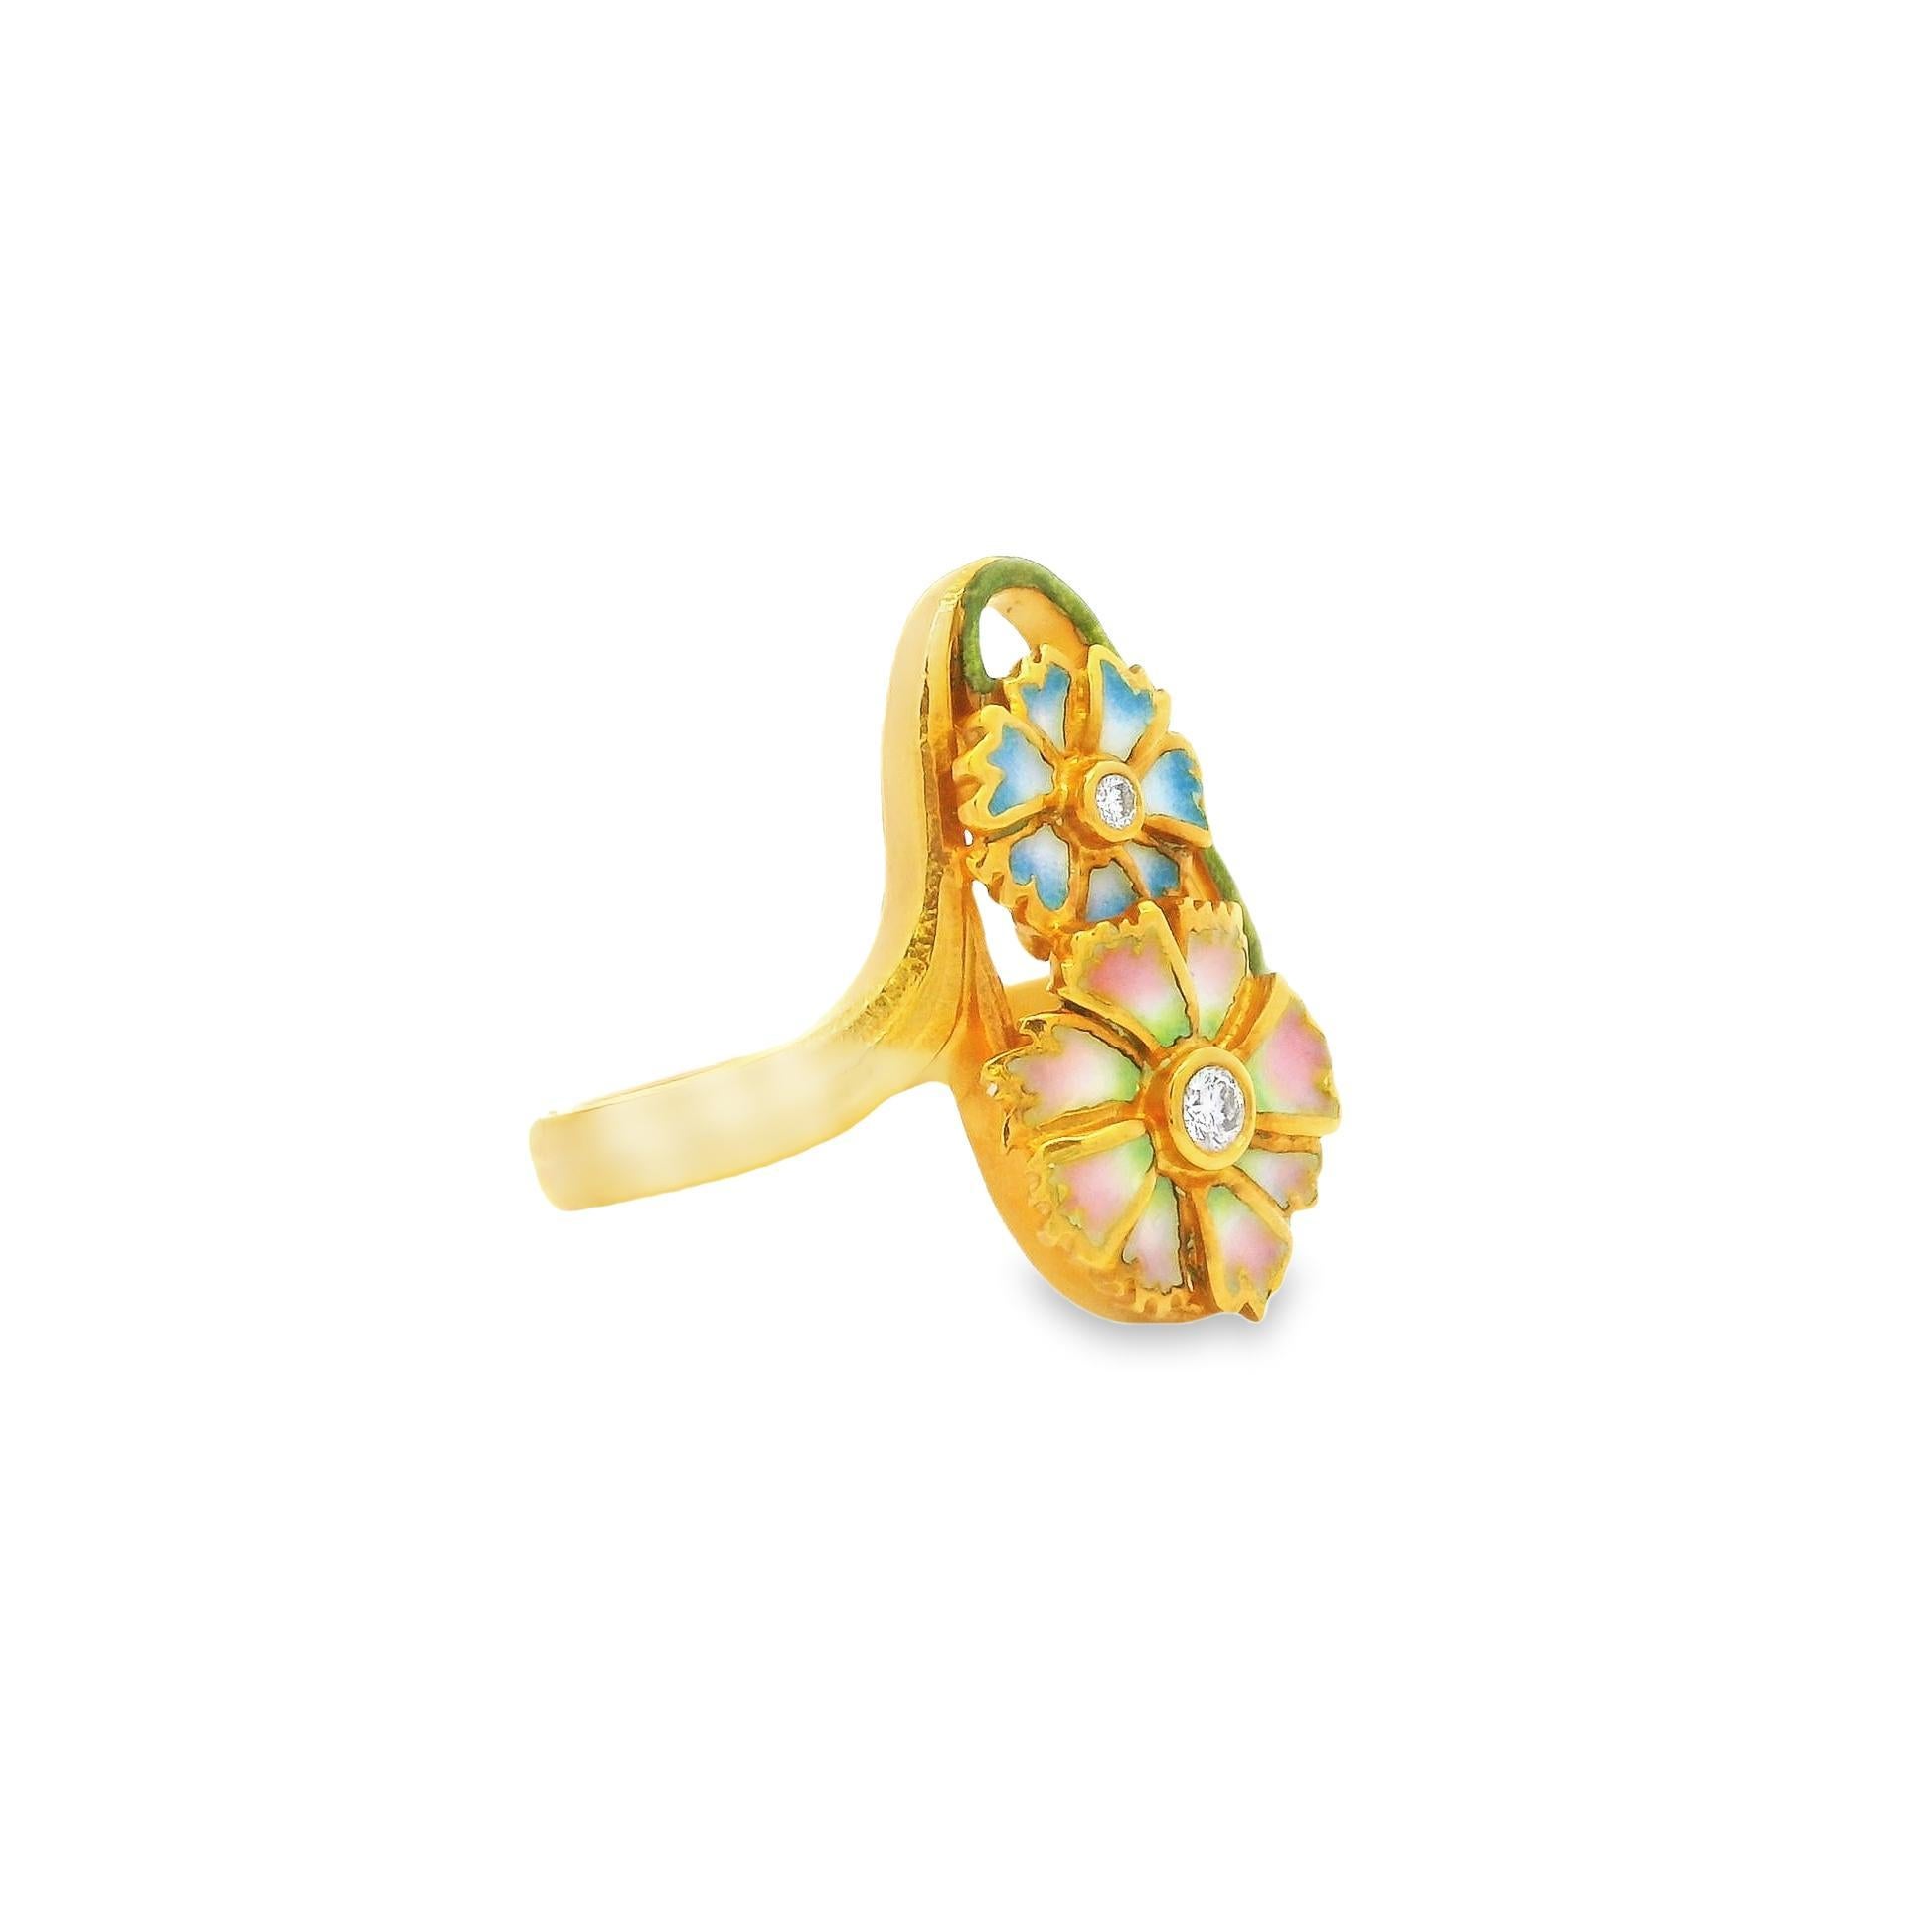 This Art Nouveau style Pliqué à jour enamel diamond ring is an original by Spanish artist and designer Masriera. The organic flowers are magnificent with enamel set without a backing like a stained-glass window which is known as Pliqué à jour. The